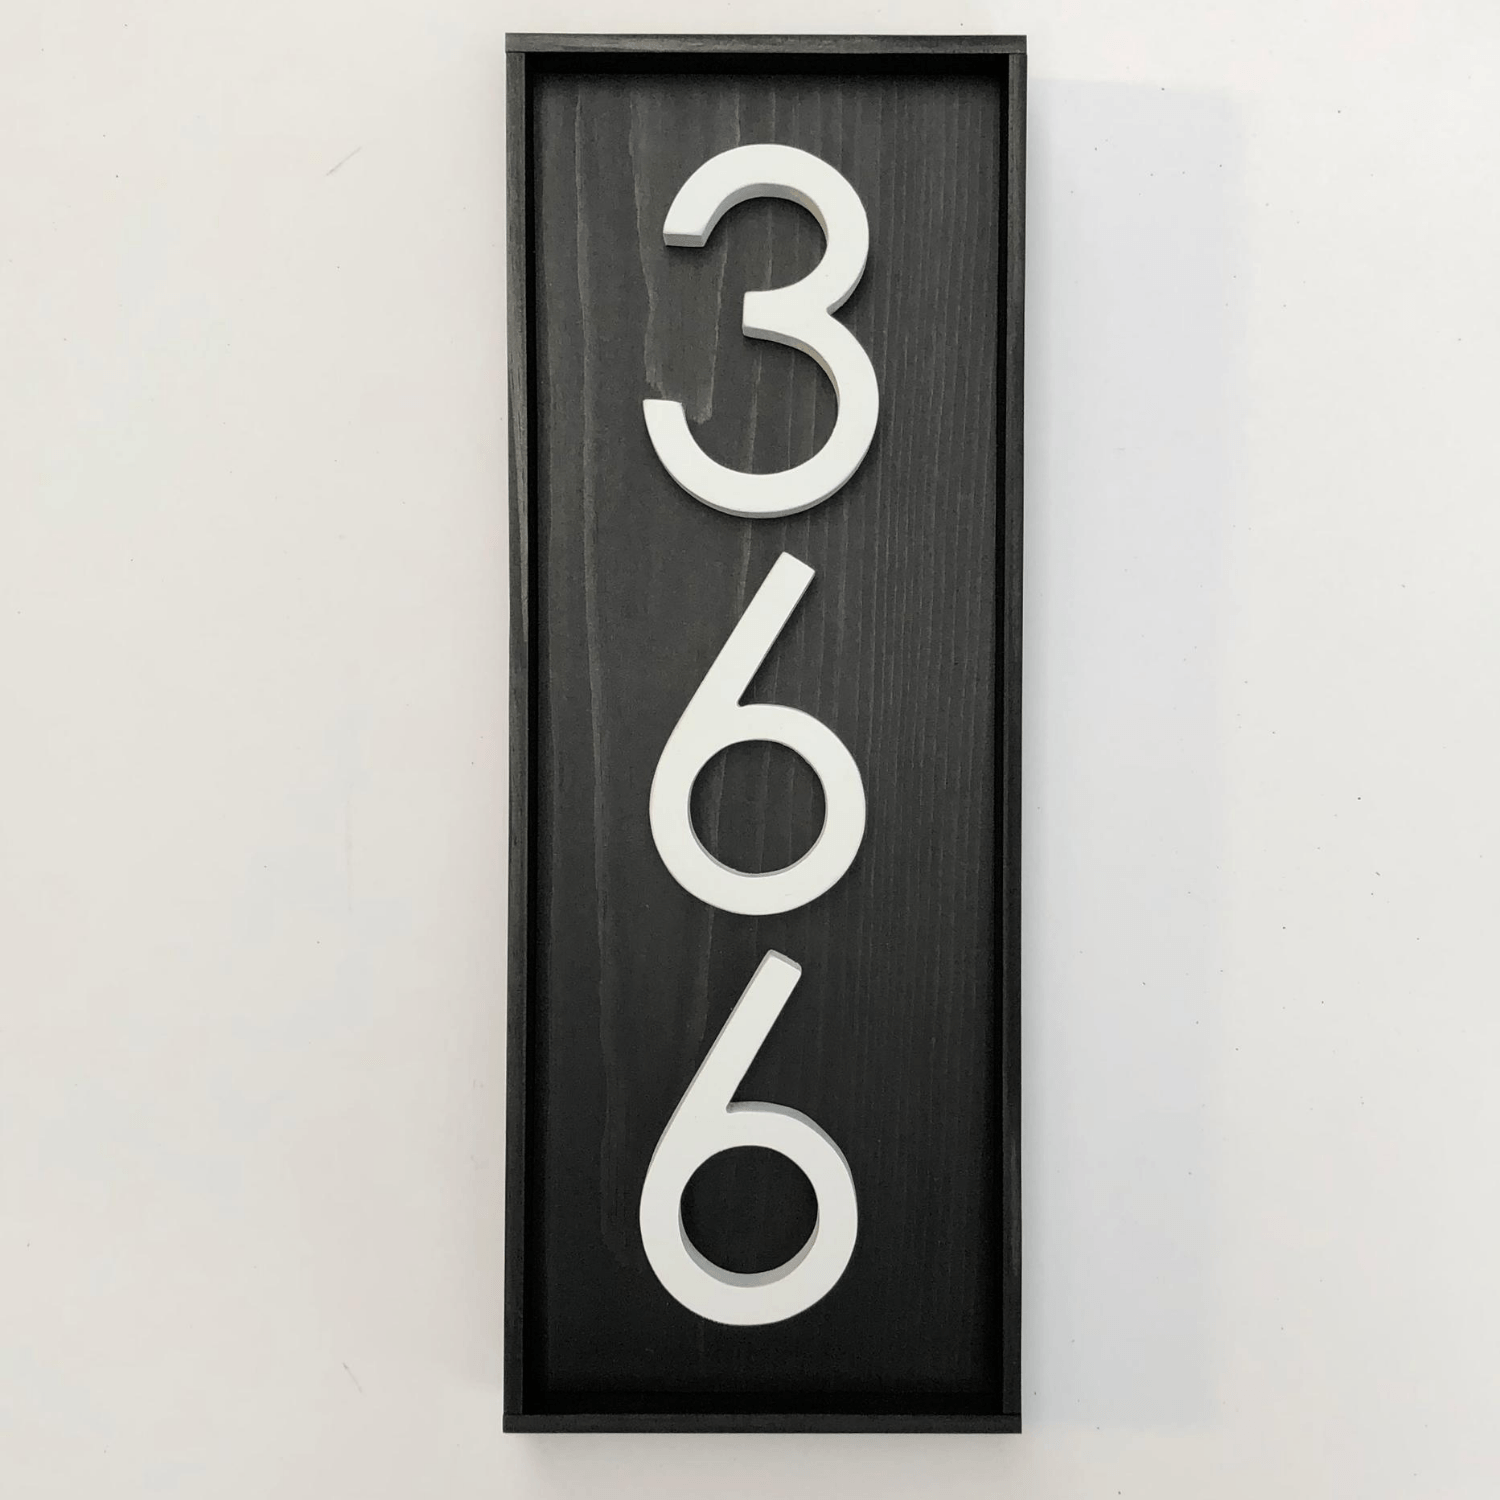 Vertical black address sign with 3 white numbers